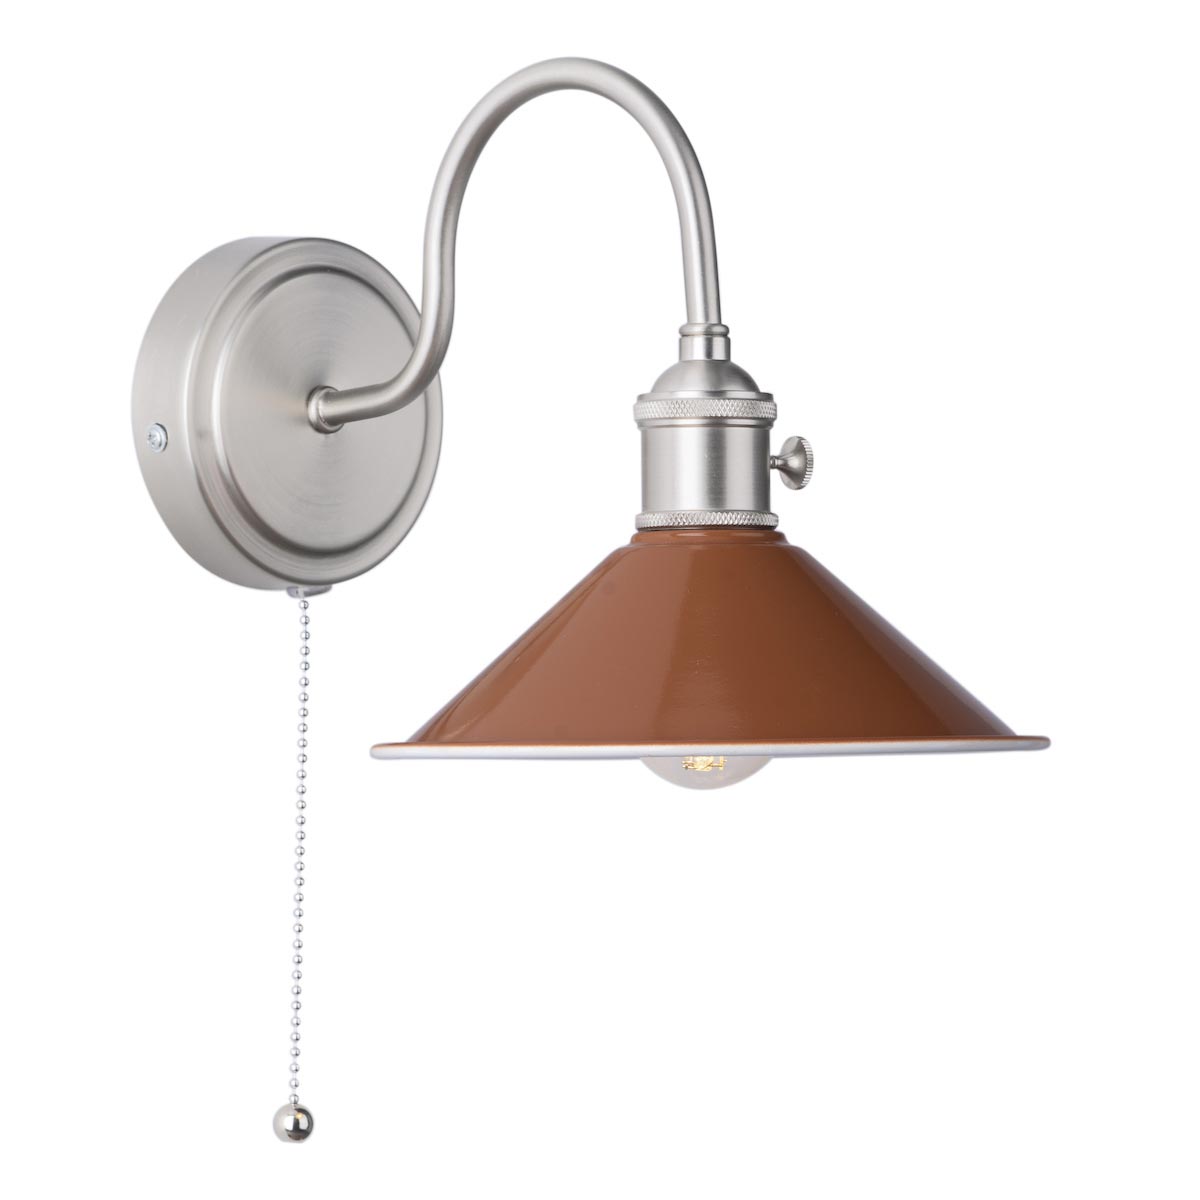 Dar Hadano Switched Single Wall Light Umber Shade / Antique Chrome